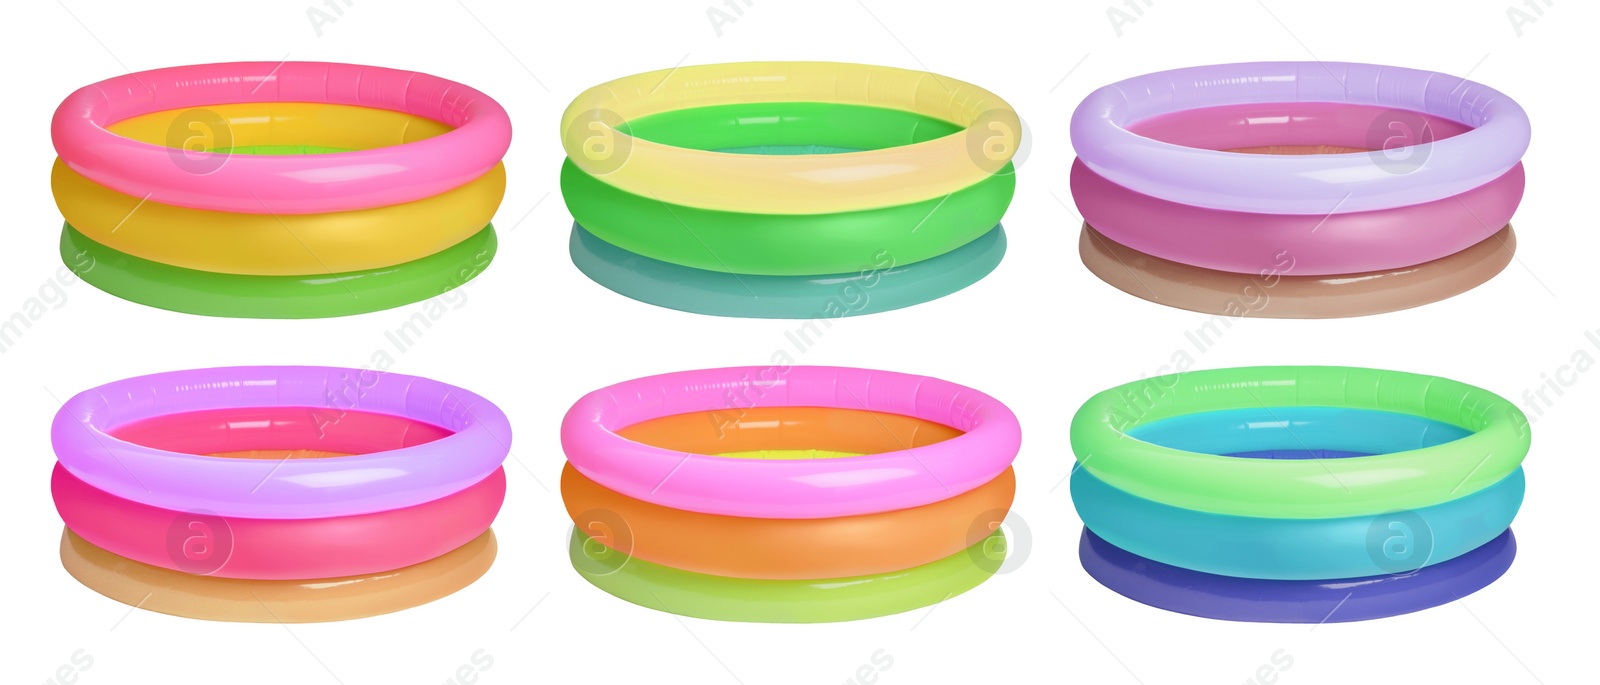 Image of Set with different colorful inflatable rubber pools on white background. Banner design